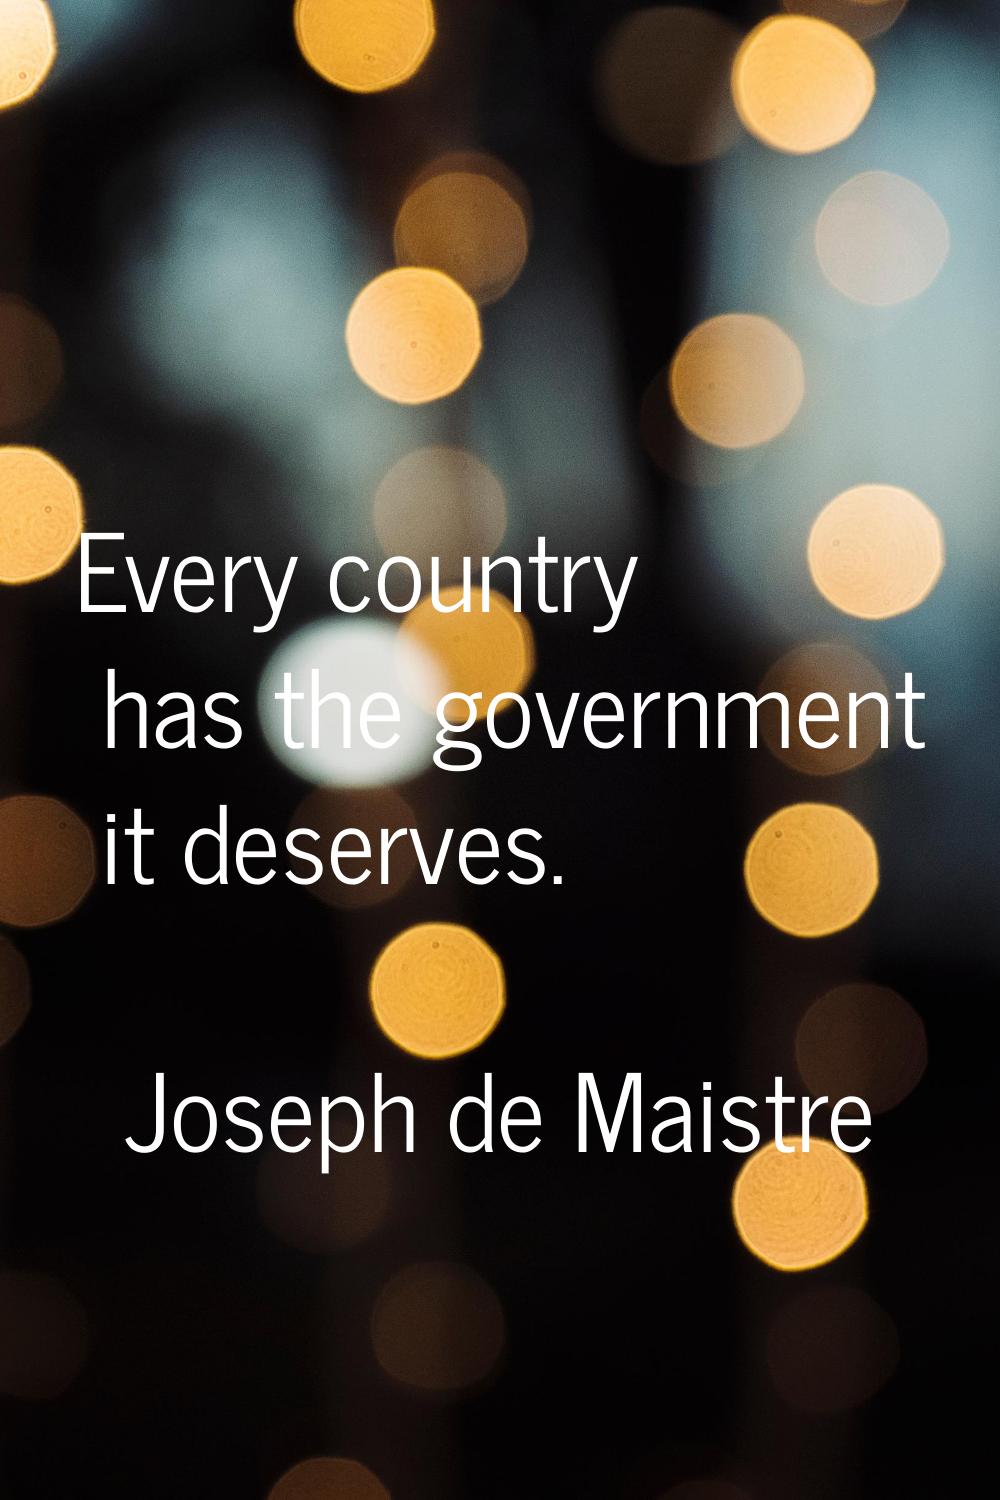 Every country has the government it deserves.